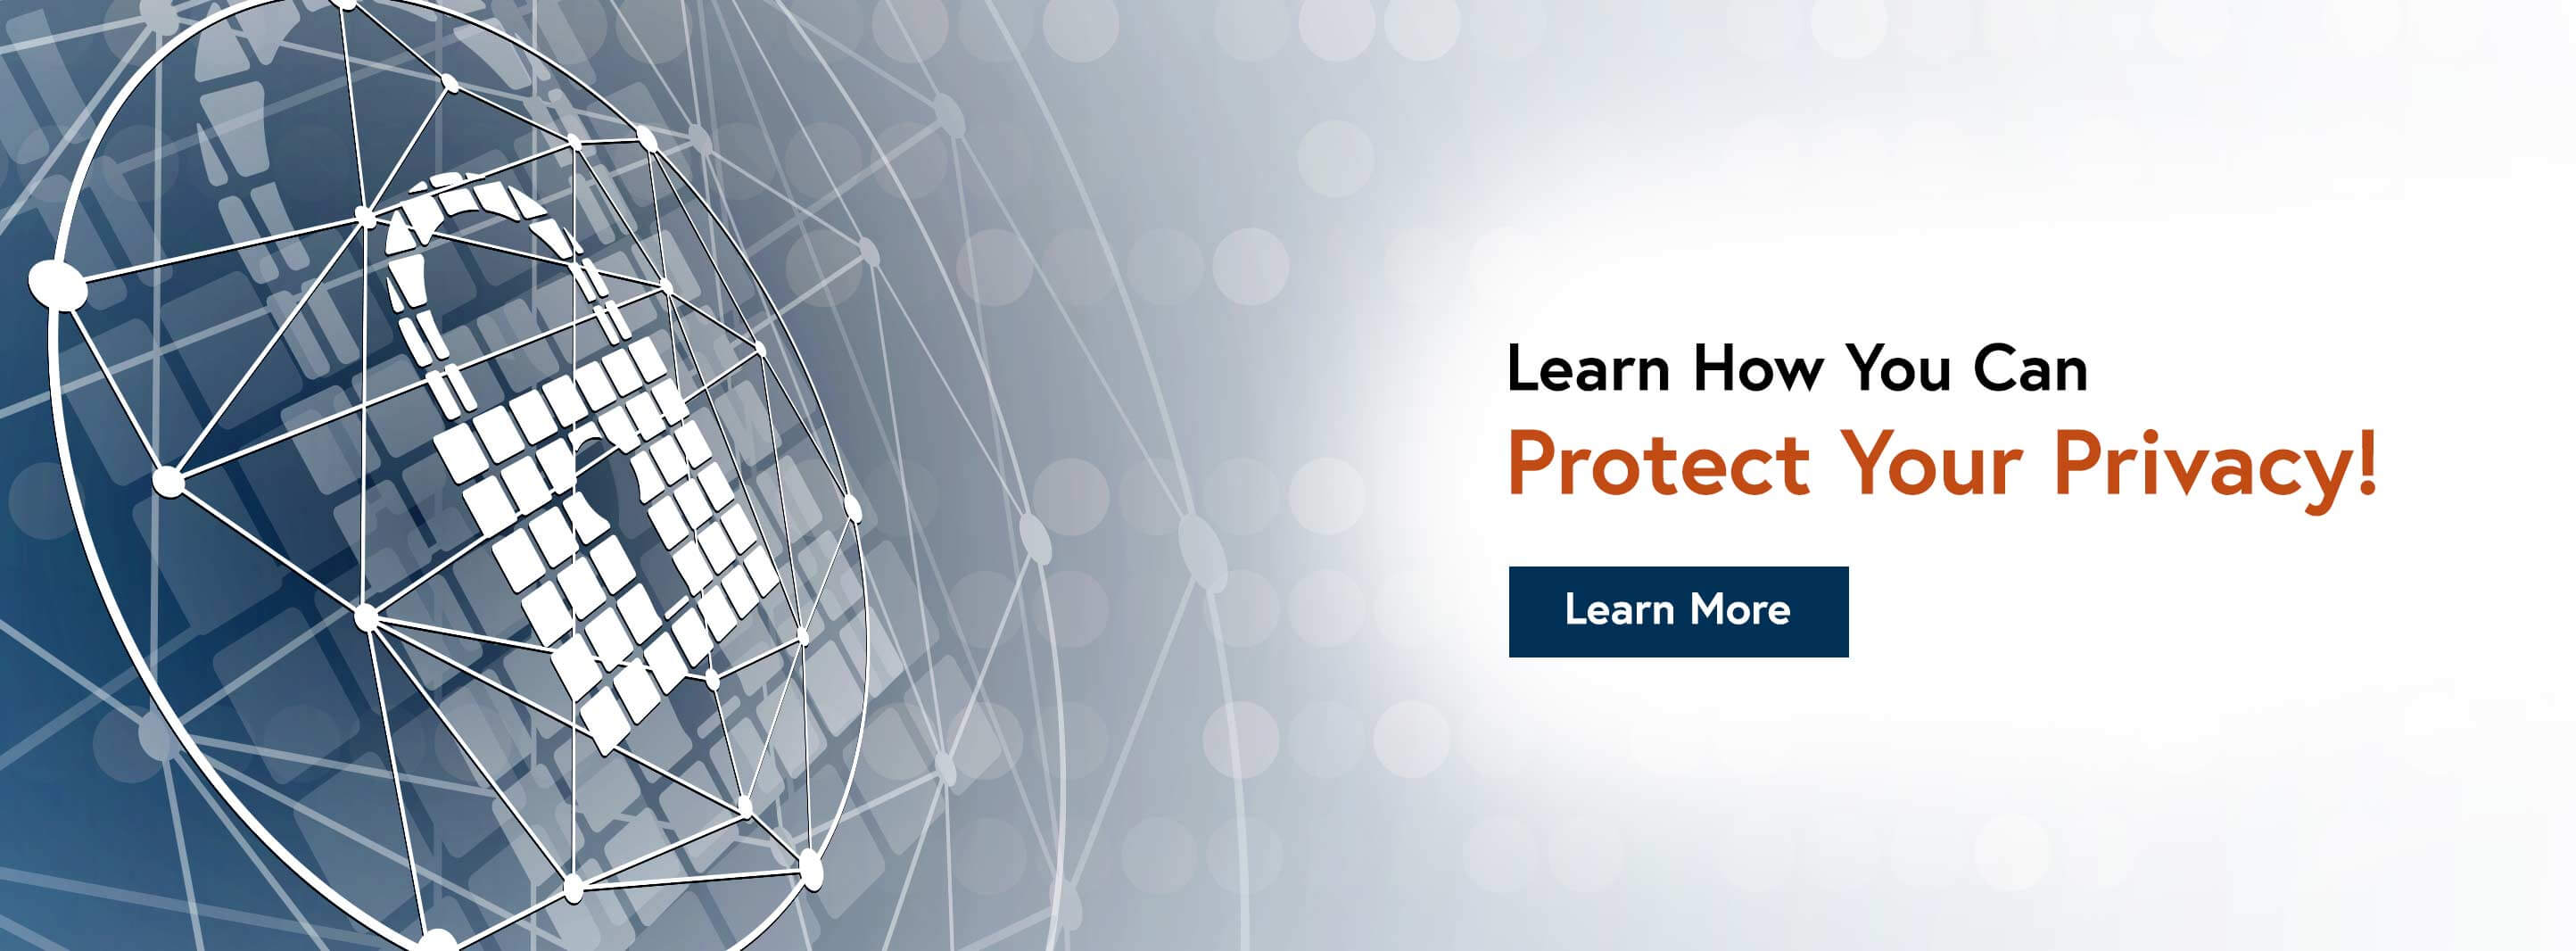 Learn how you can Protect Your Privacy. Learn More.